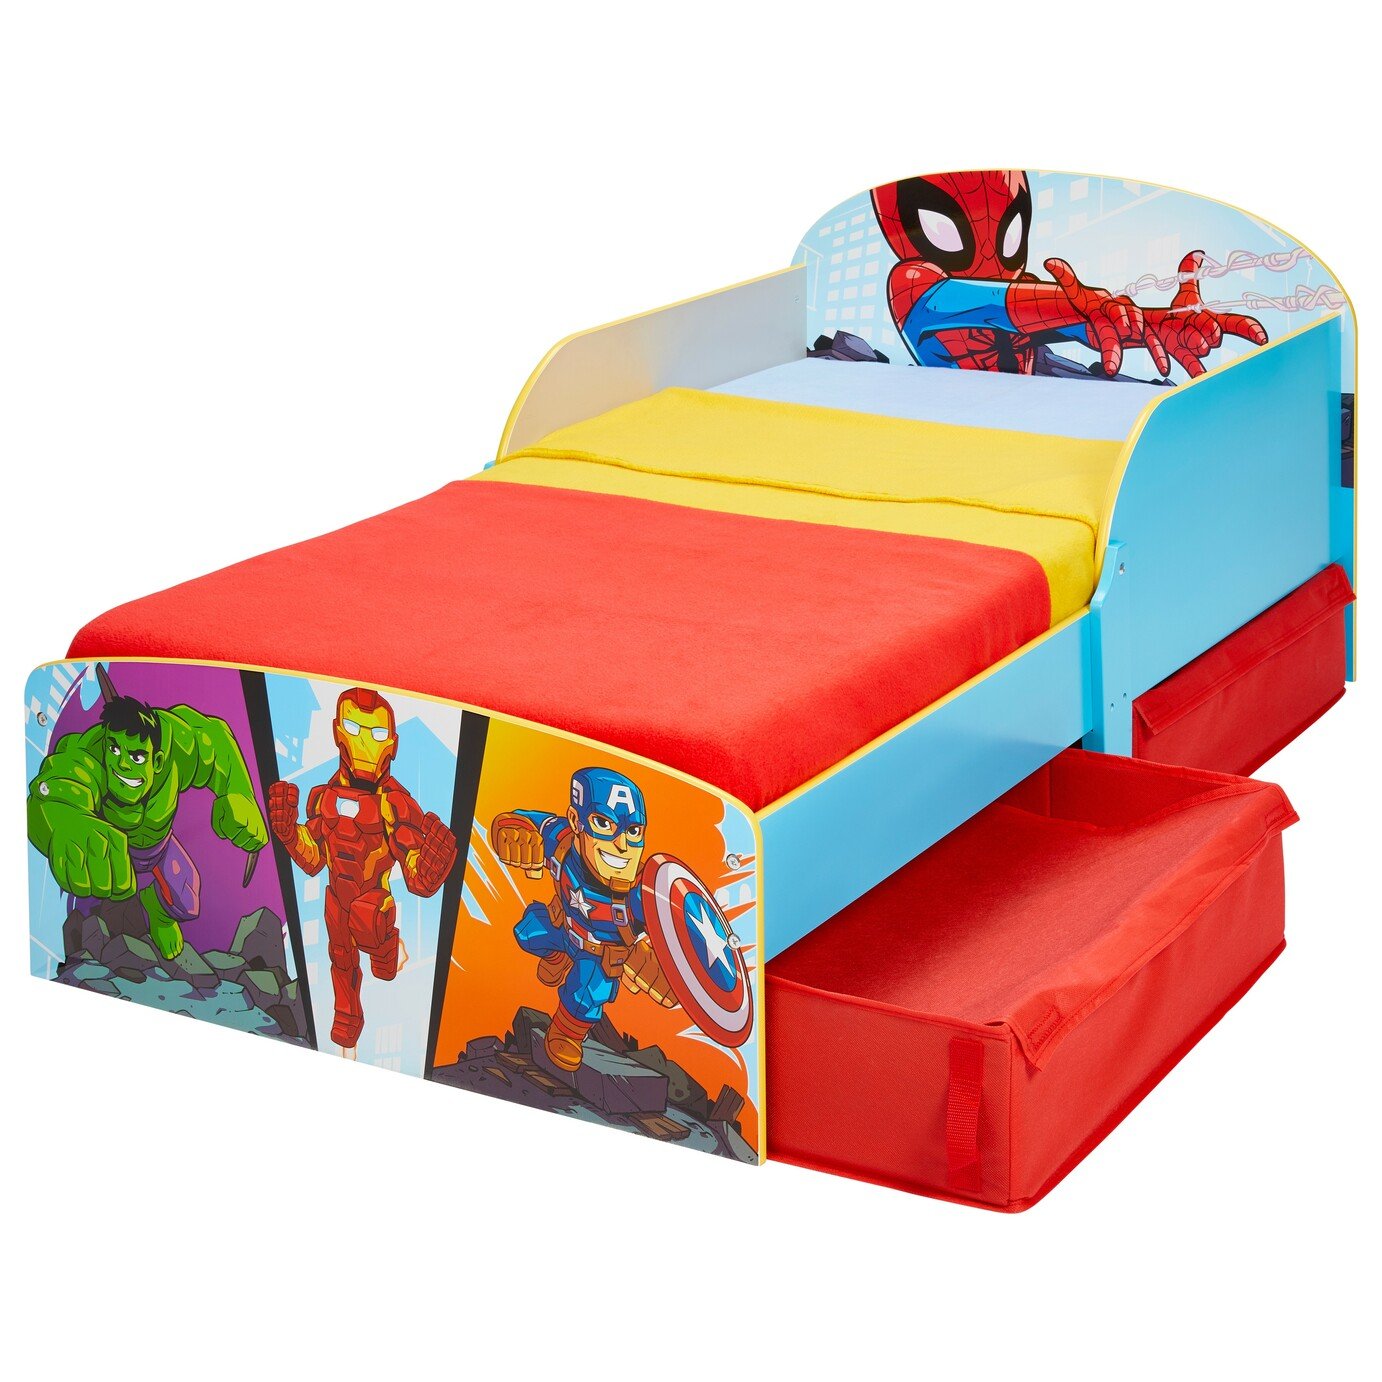 Marvel Avengers Toddler Bed Frame with Drawers Review